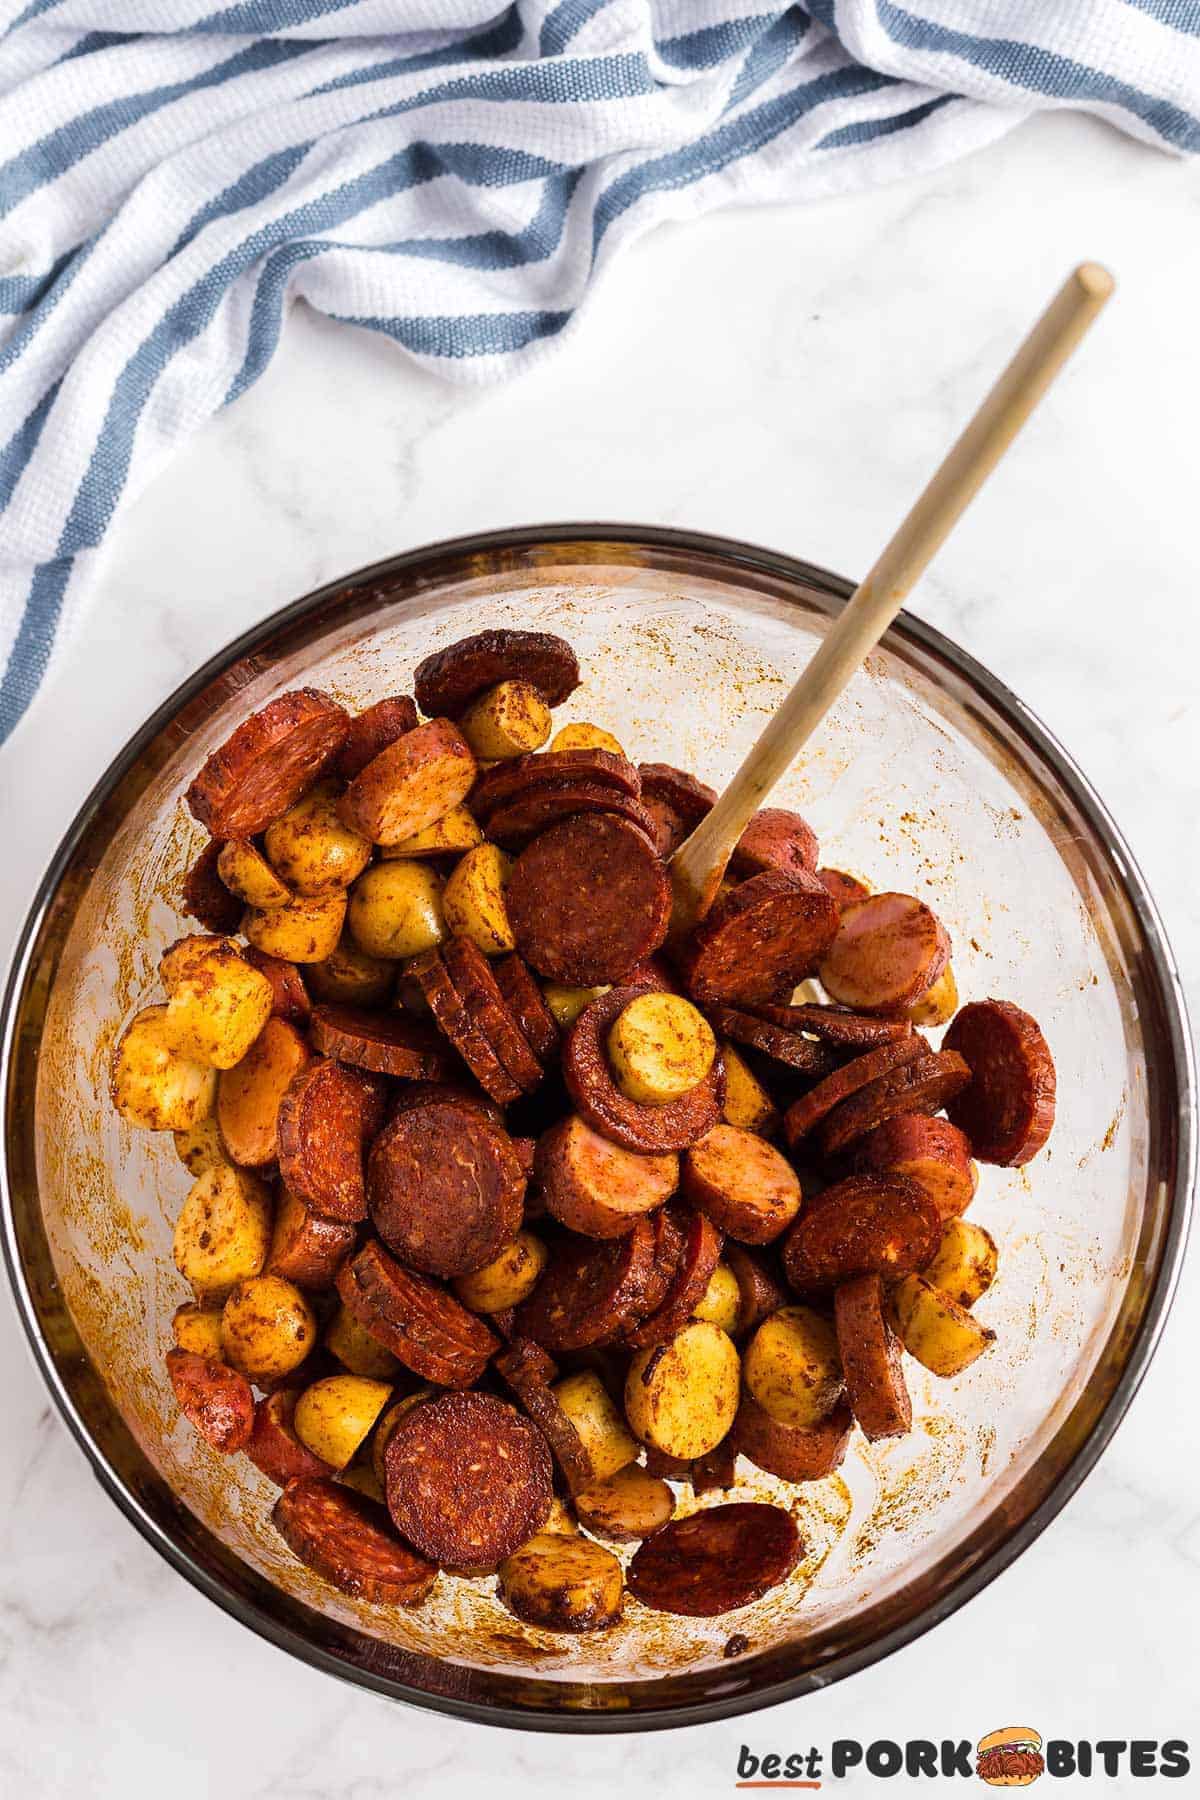 a mixing bowl with potatoes and chorizo coated in seasoning